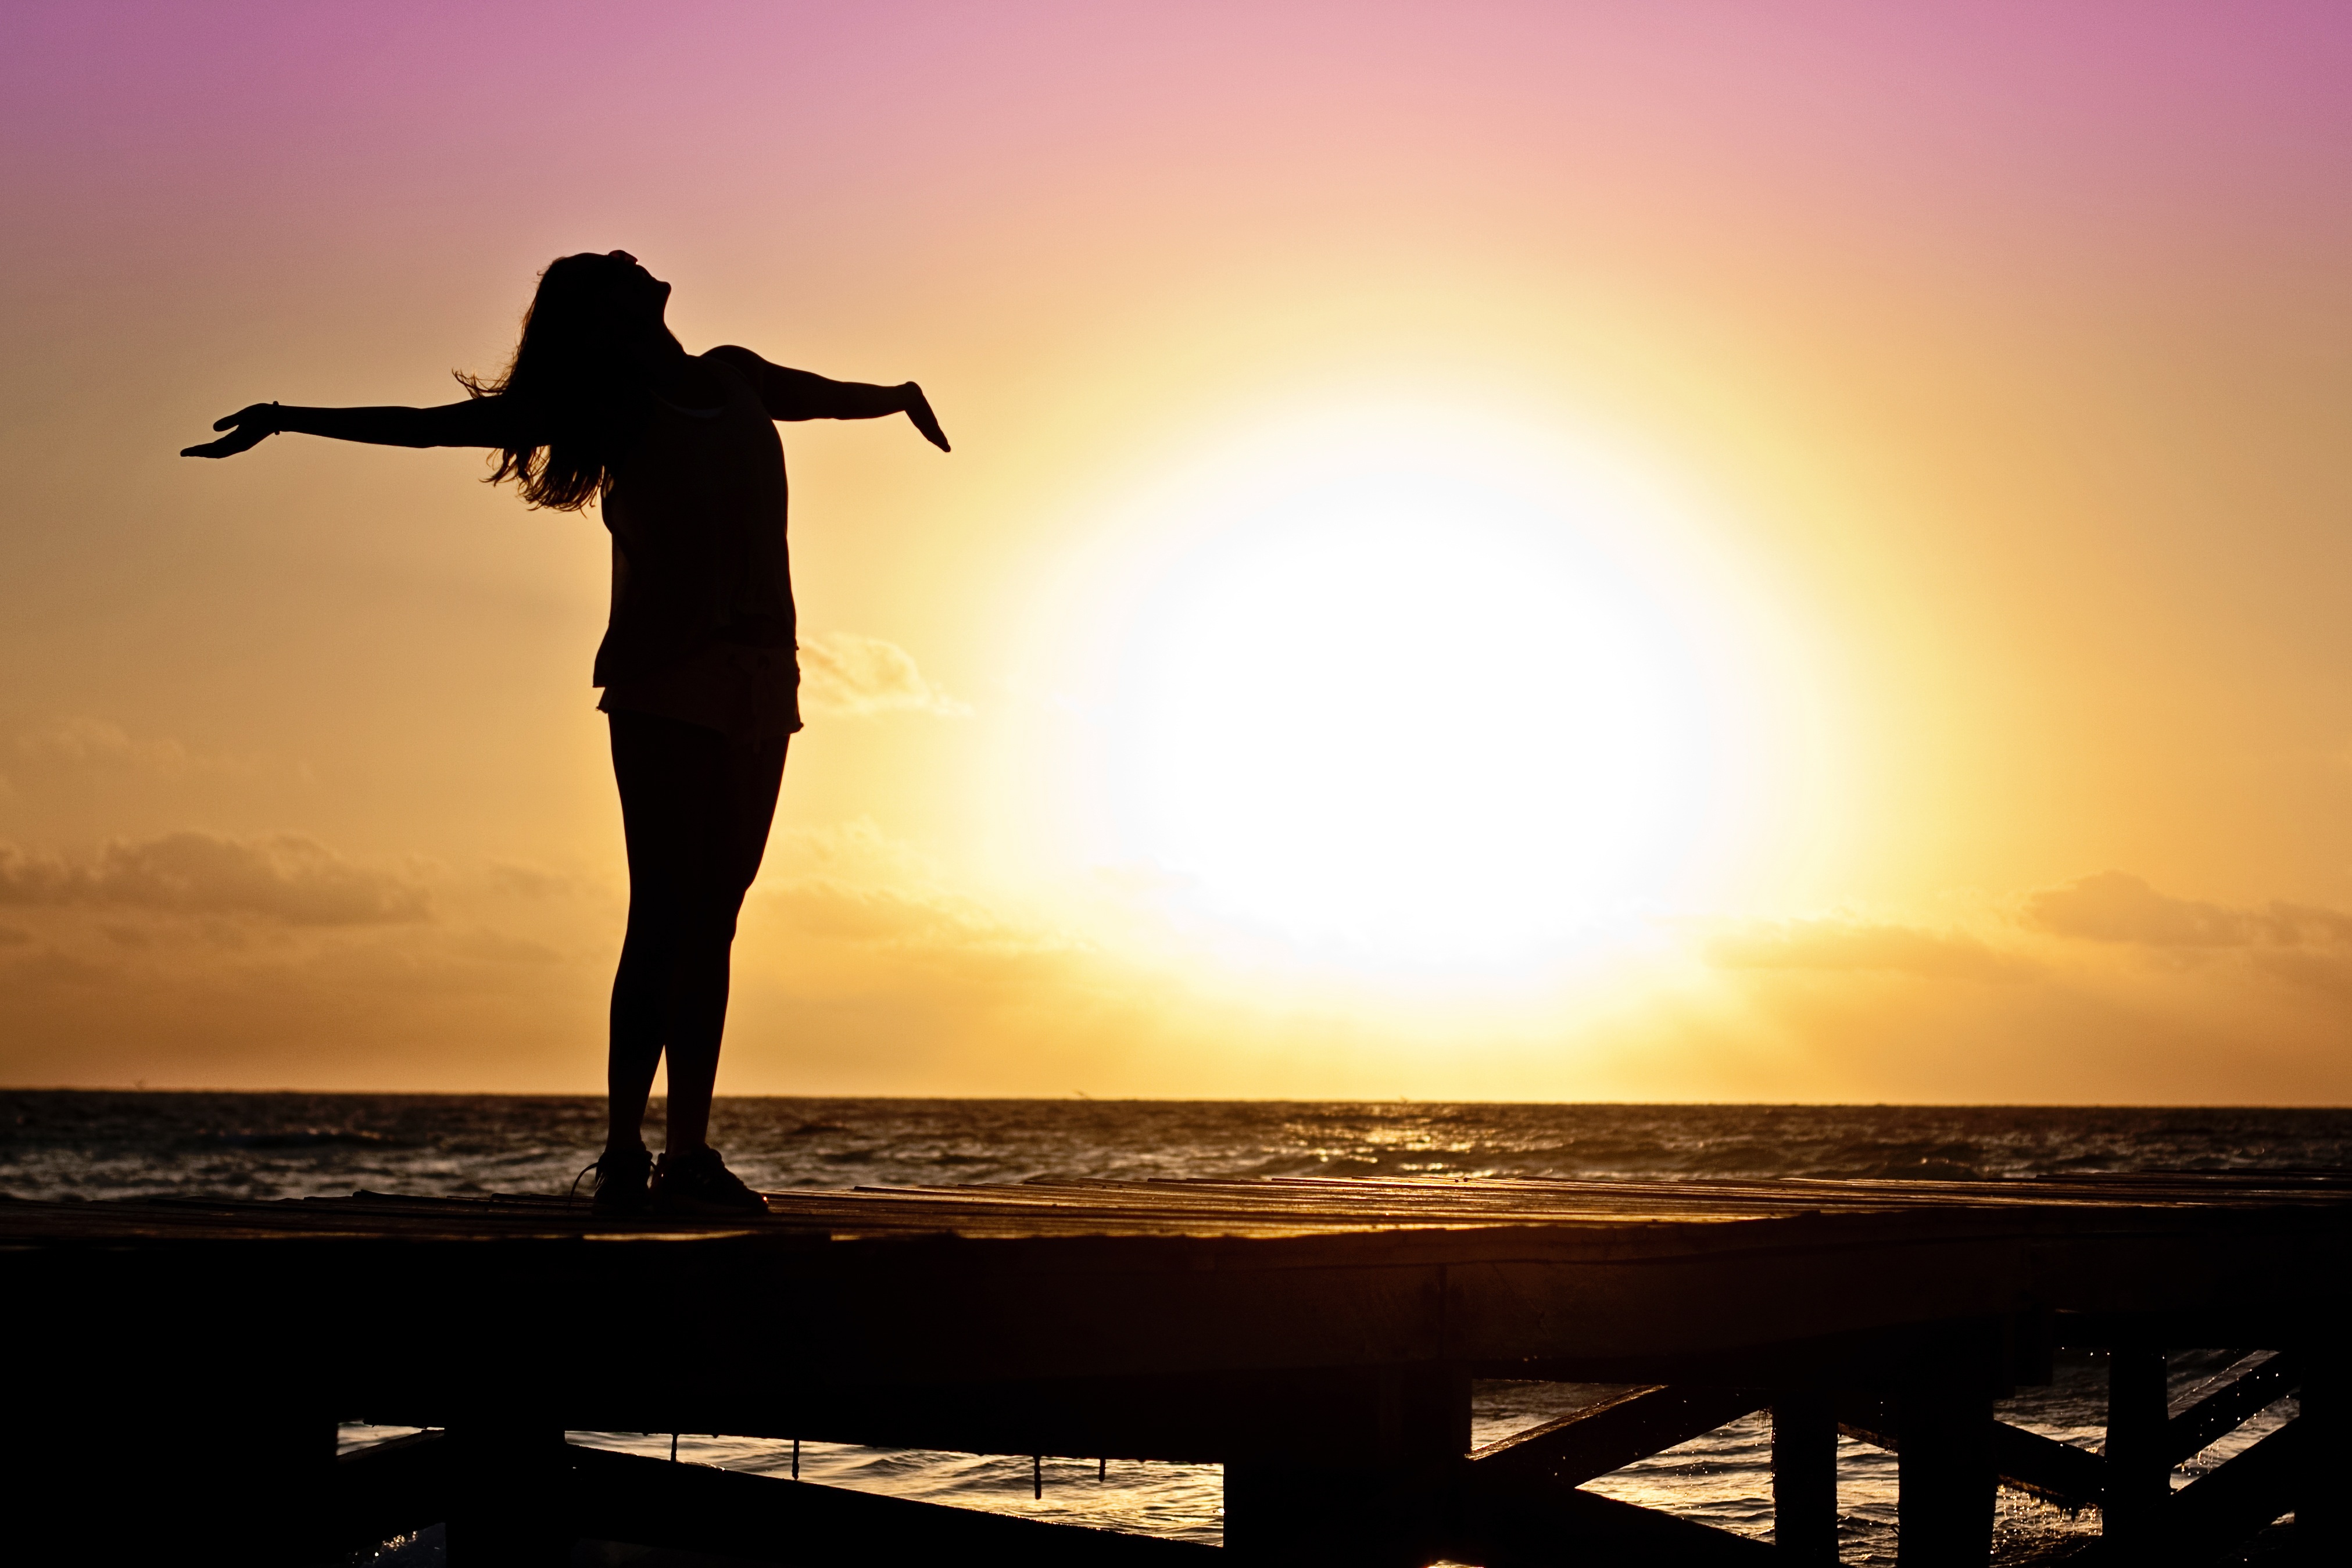 Free stock images of silhouette girl during sunset dawn